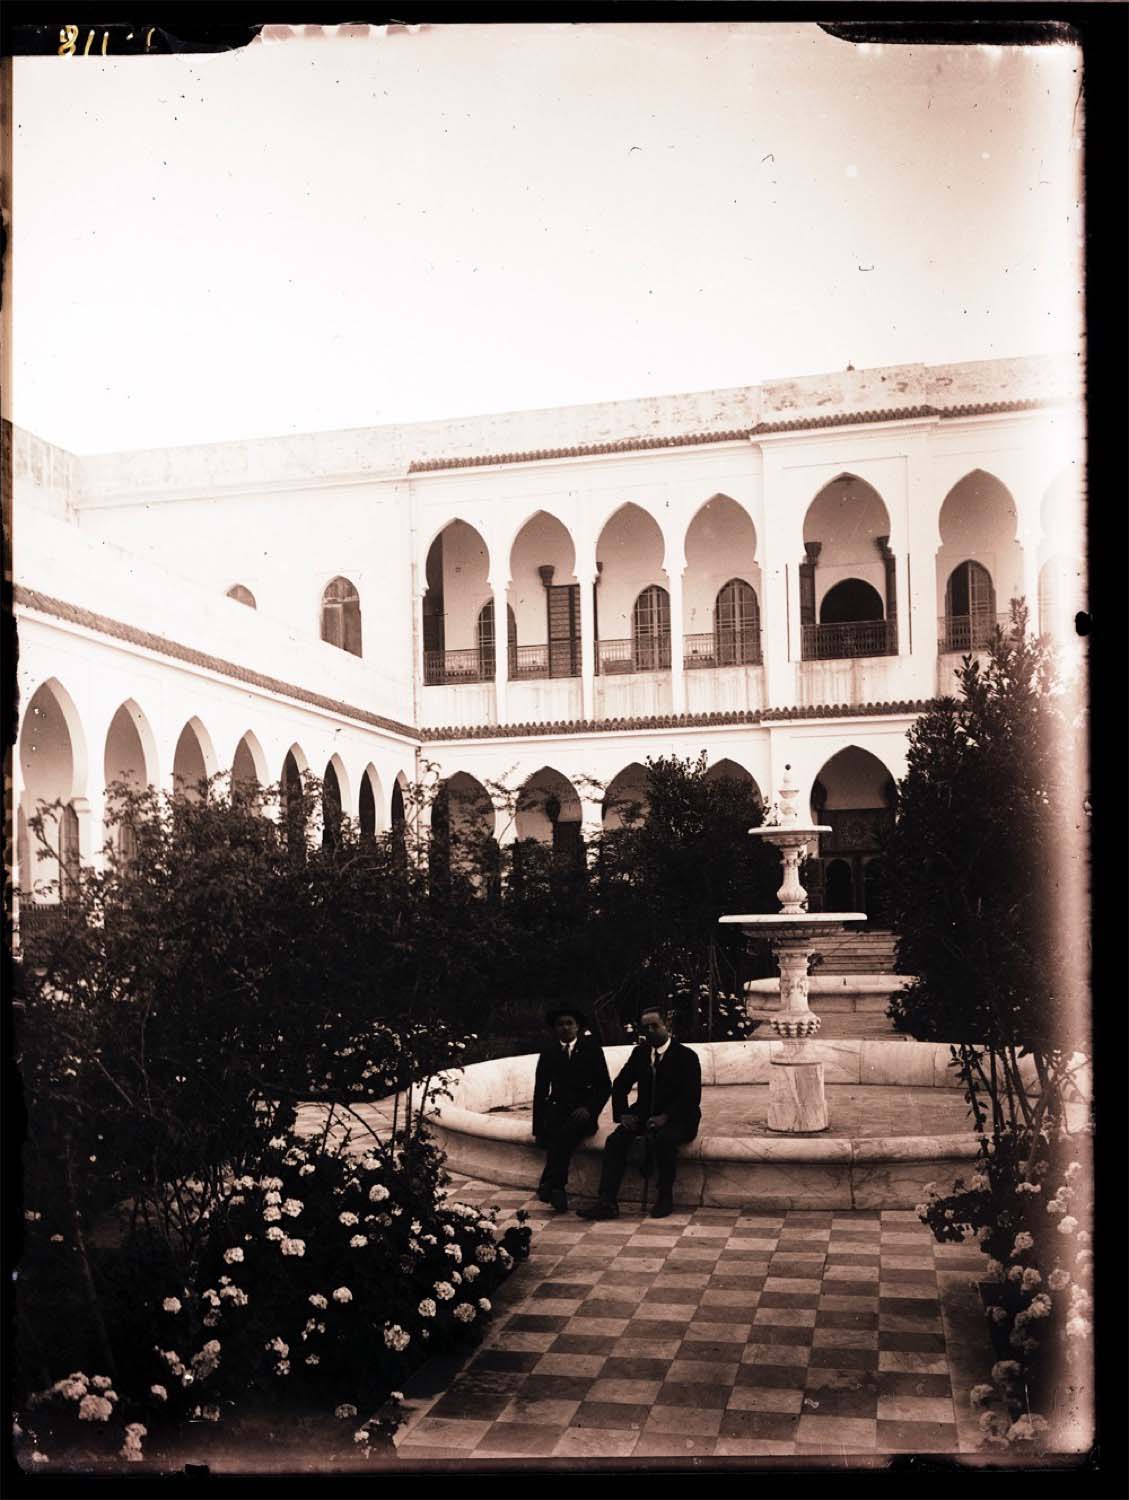 View of two people at the fountain in the courtyard of a large house, possibly Moulay Hafid's Palace